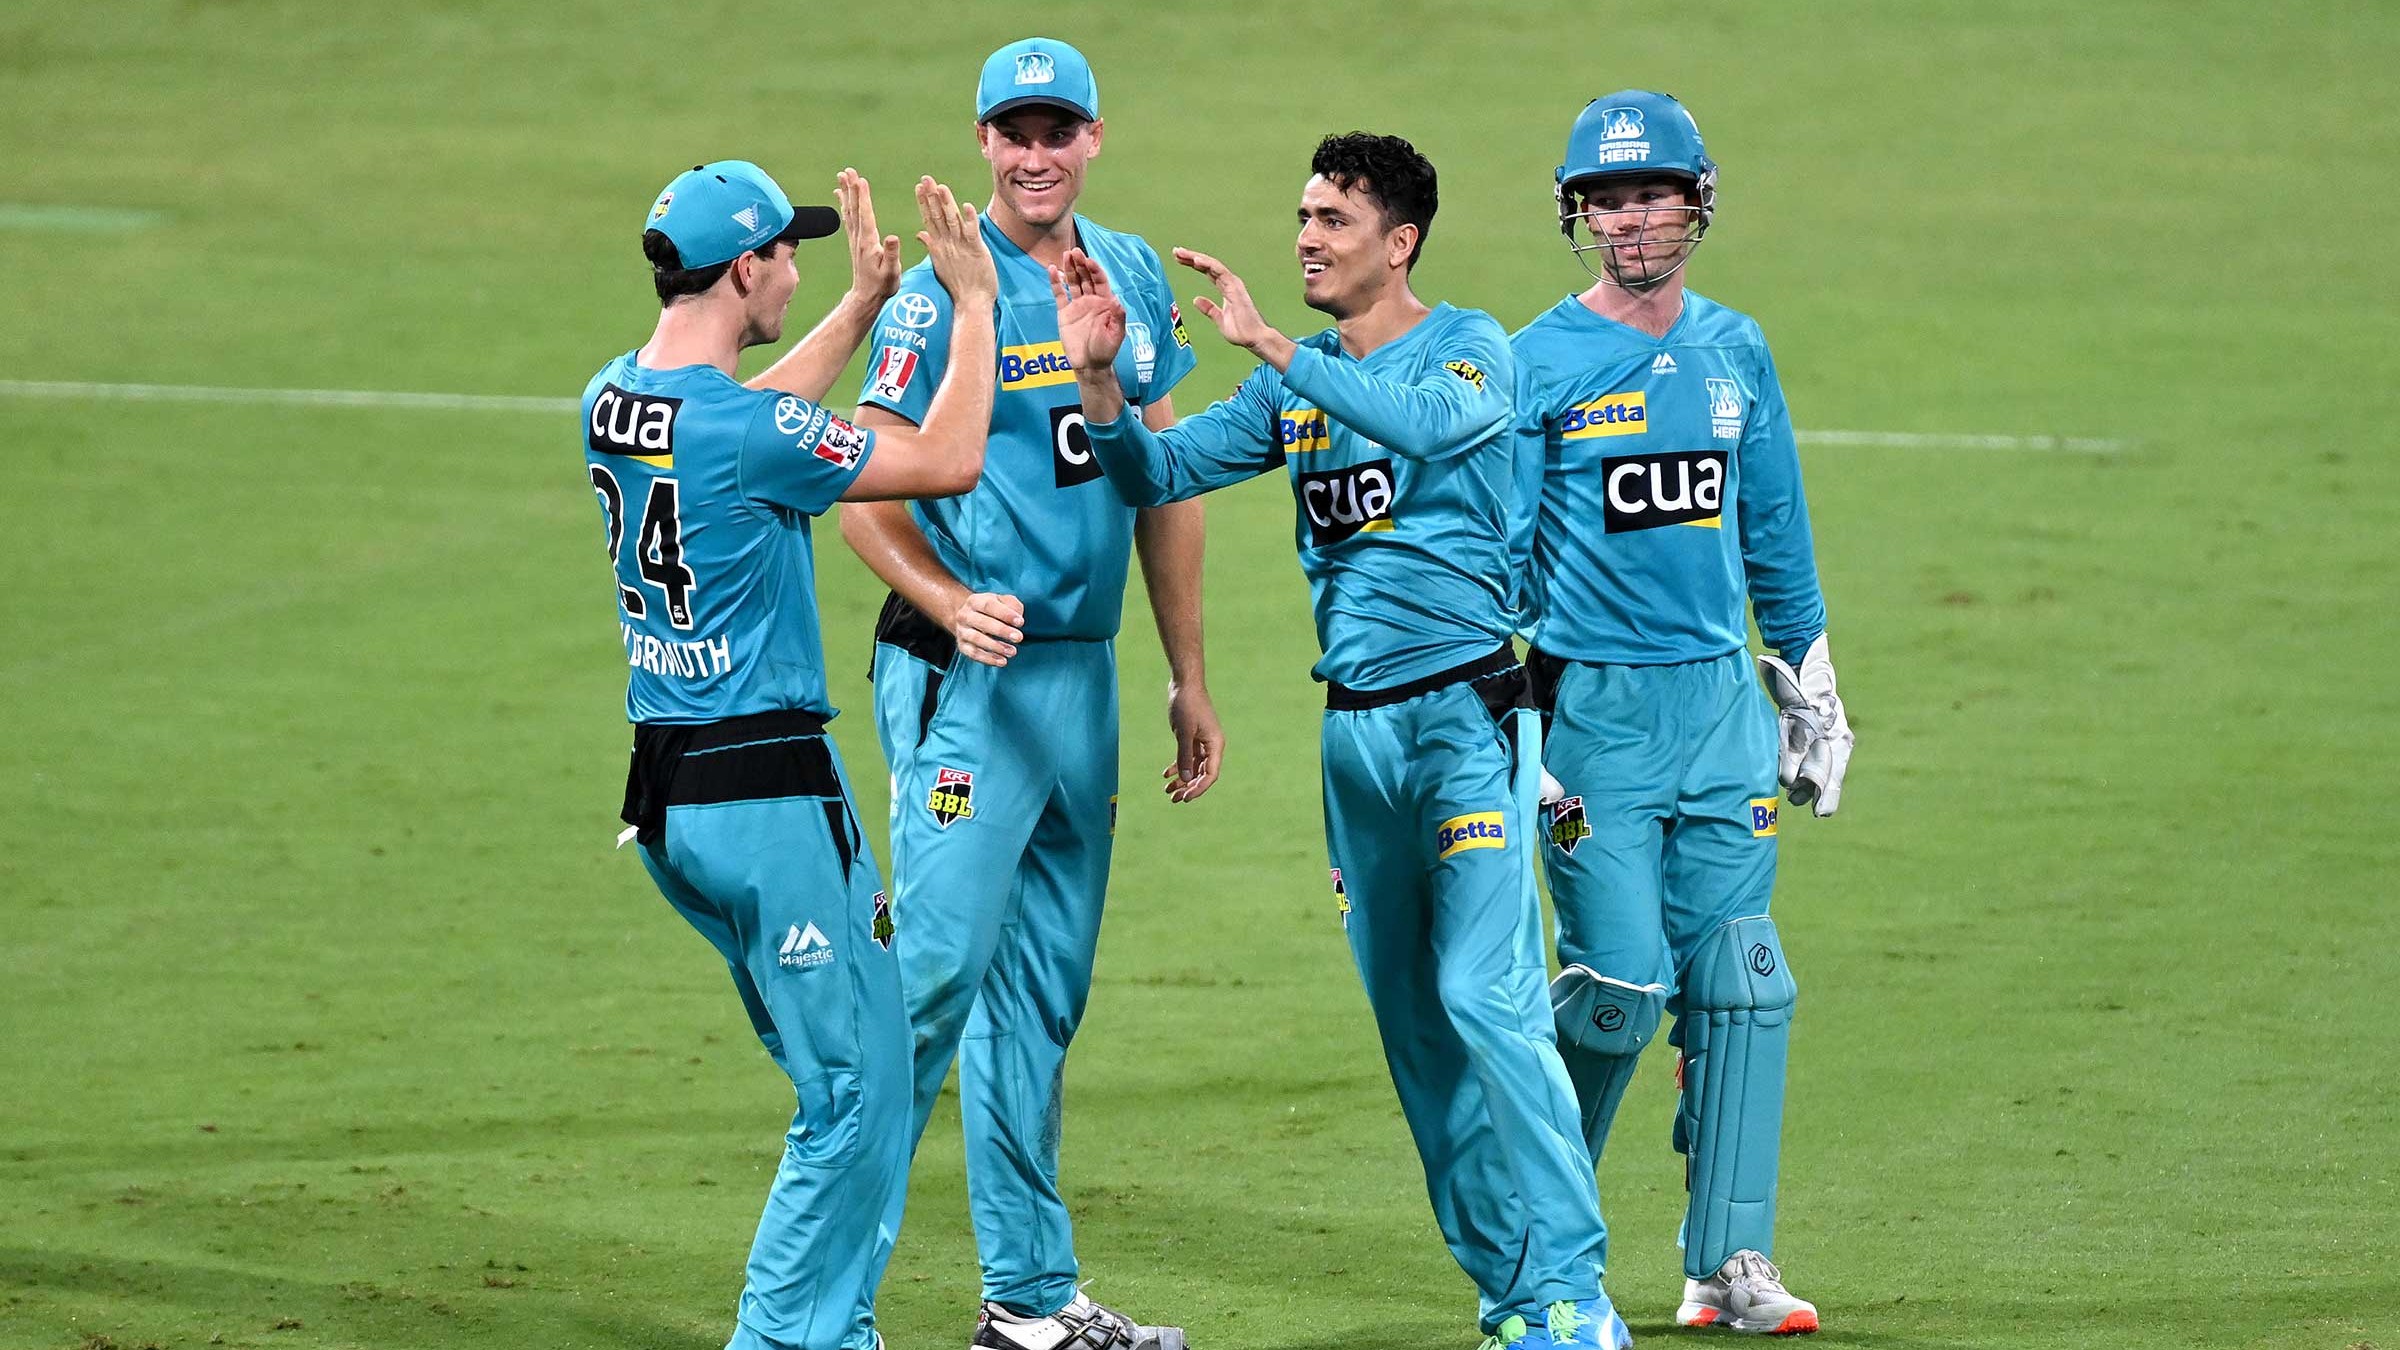 Heat look to regain momentum on home soil against high-flying Sixers